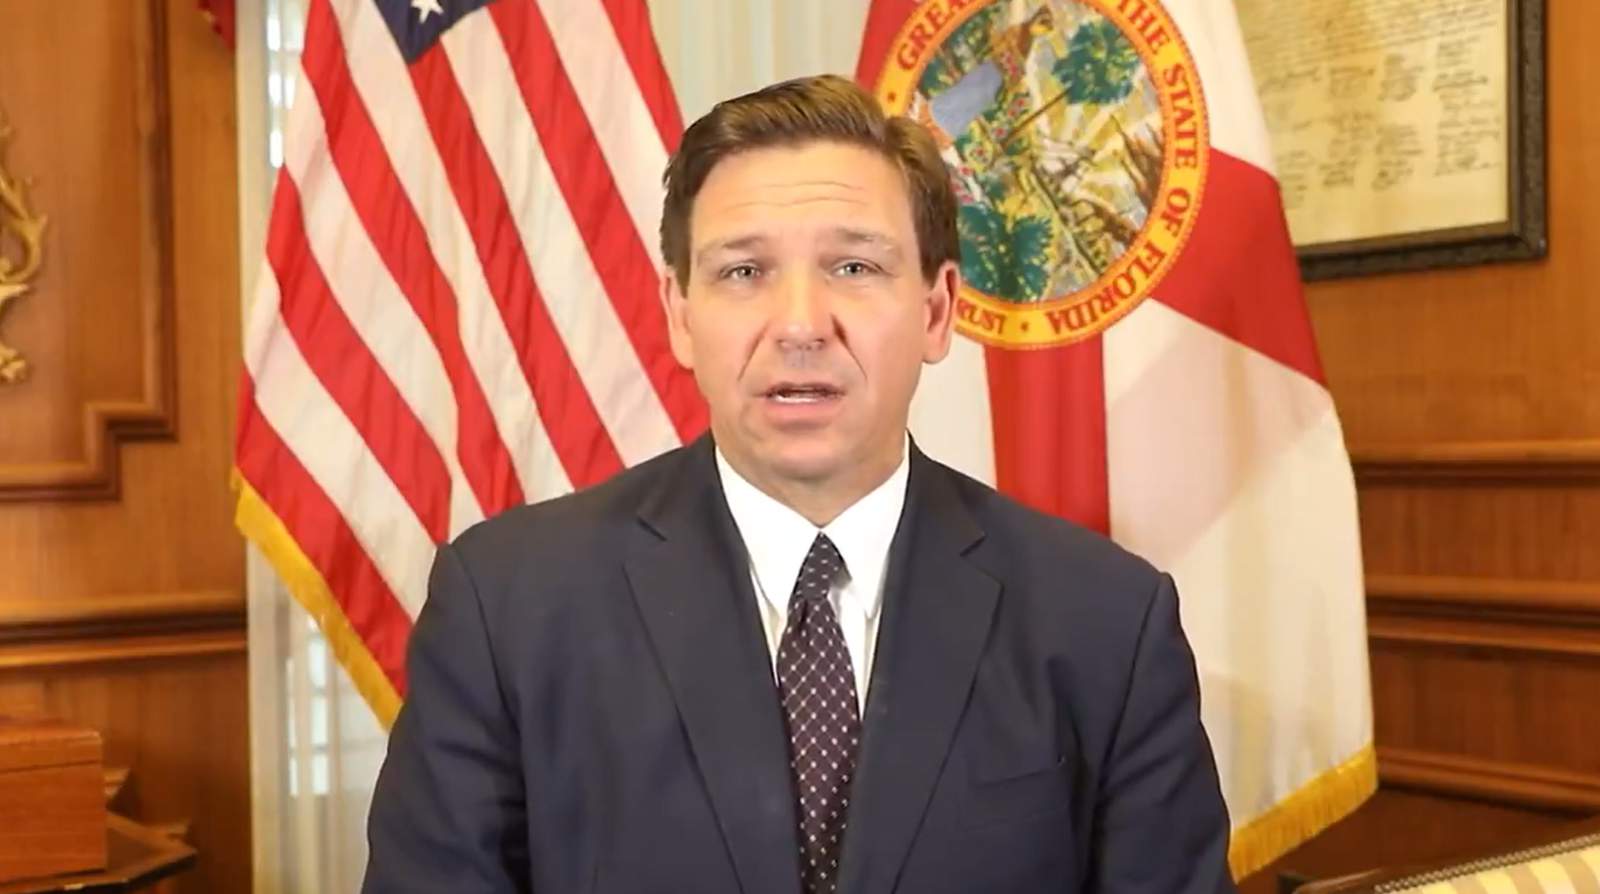 WATCH: Gov. Ron DeSantis holds news conference in Central Florida